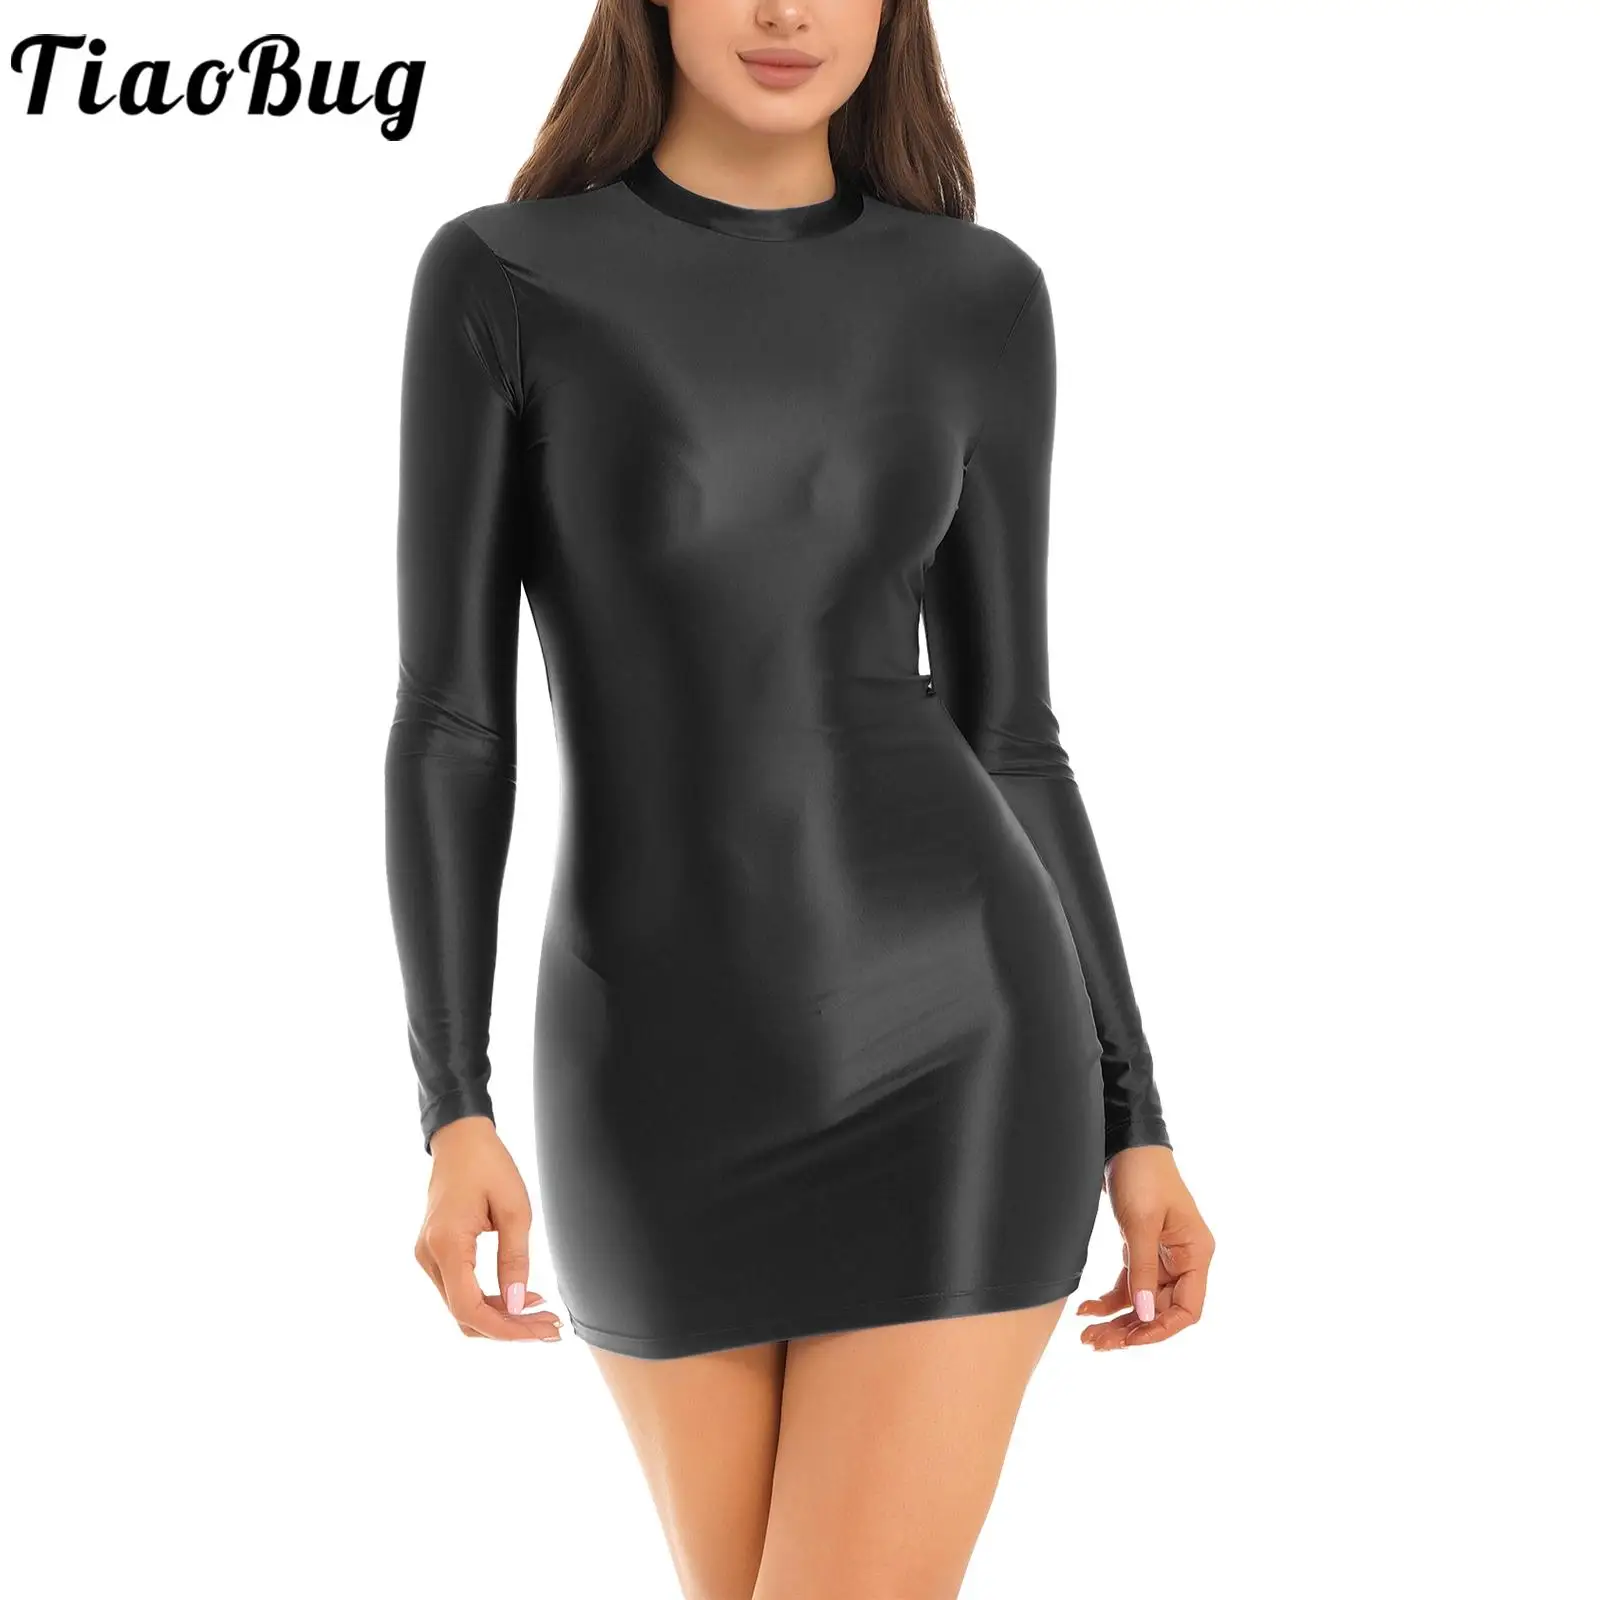 Women Sexy Oil Glossy Micro Mini Dress Tight Party Dress Pencil Bodycon Dress Club Outfit Nightwear Pole Dancing Costume jimiko erotic costume tight patent leather dress sexy woman nightclub uniform set porno sex cosplay hot lingeries slutty outfit